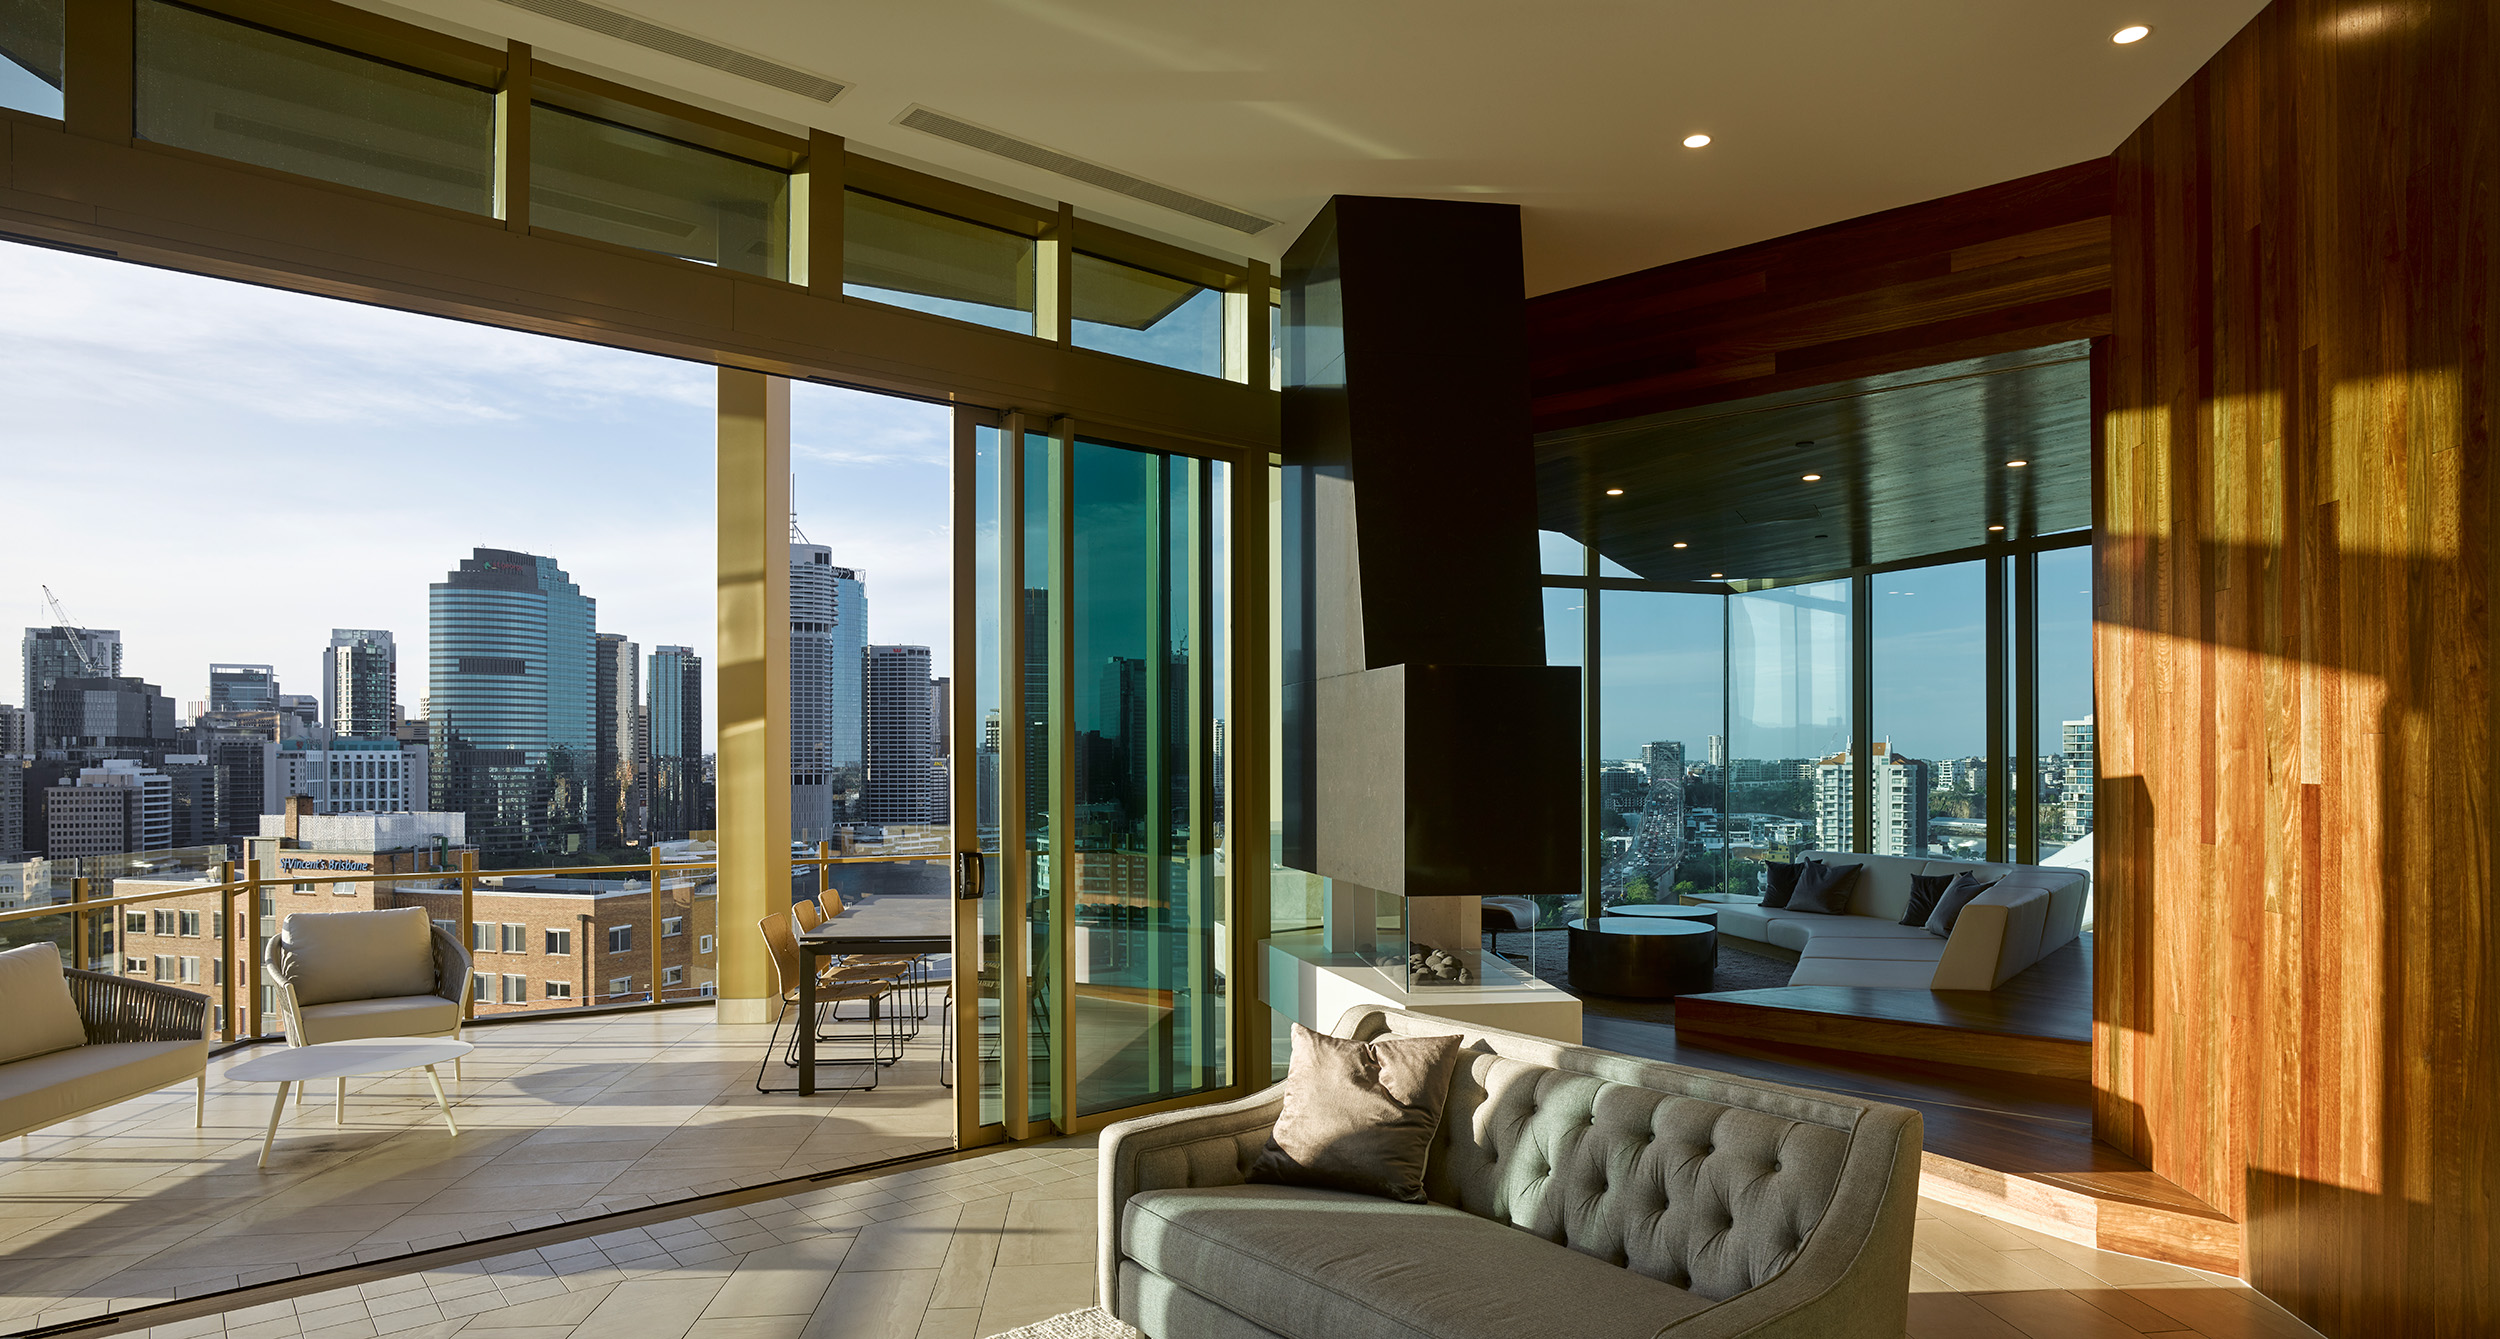 Stunning view from a penthouse apartment, showcasing the lounge area with premium furniture, tile floors, gold accents, and a beautiful timber wall. The space is surrounded by expansive glazing, flooding the interior with abundant natural light.